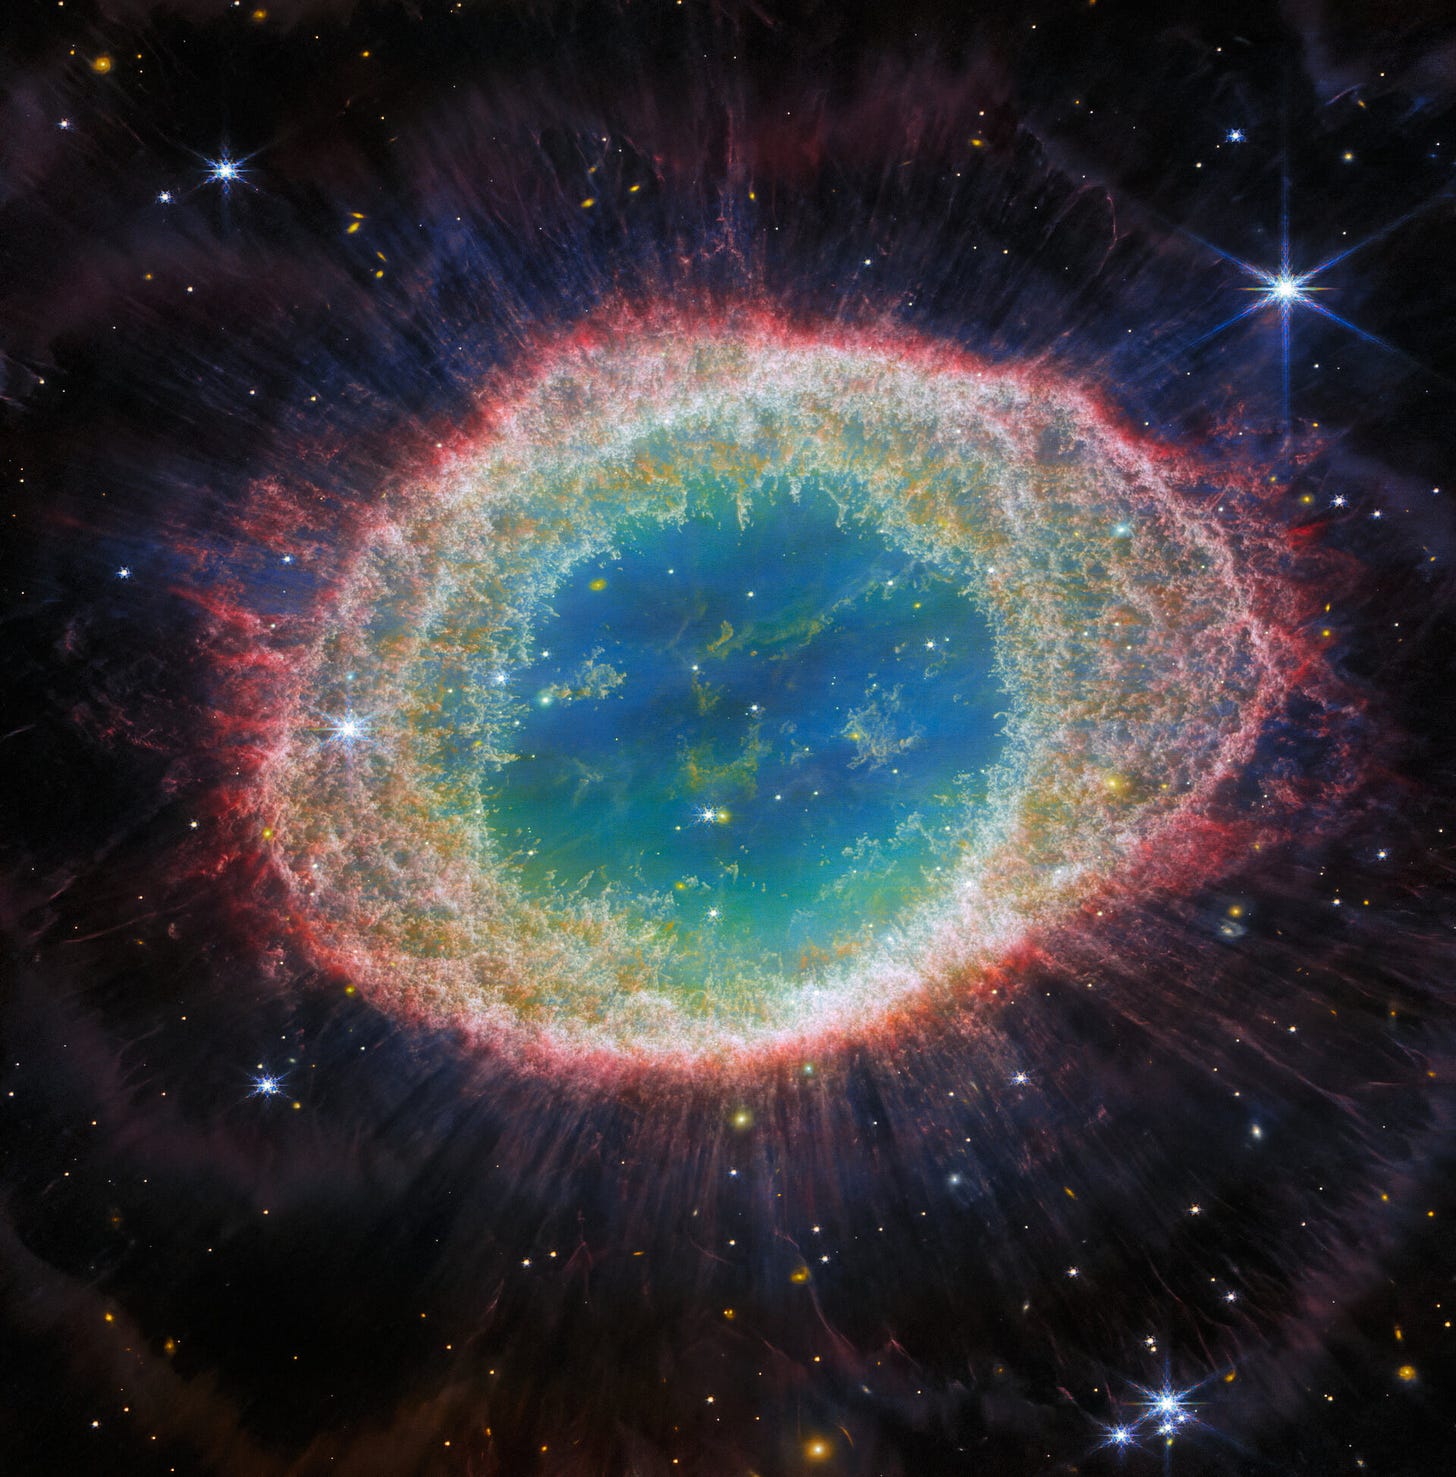 This image of the Ring Nebula appears as a distorted doughnut. The nebula’s inner cavity hosts shades of blue and green, while the detailed ring transitions through shades of orange in the inner regions and pink in the outer region. The ring’s inner region has distinct filament elements.